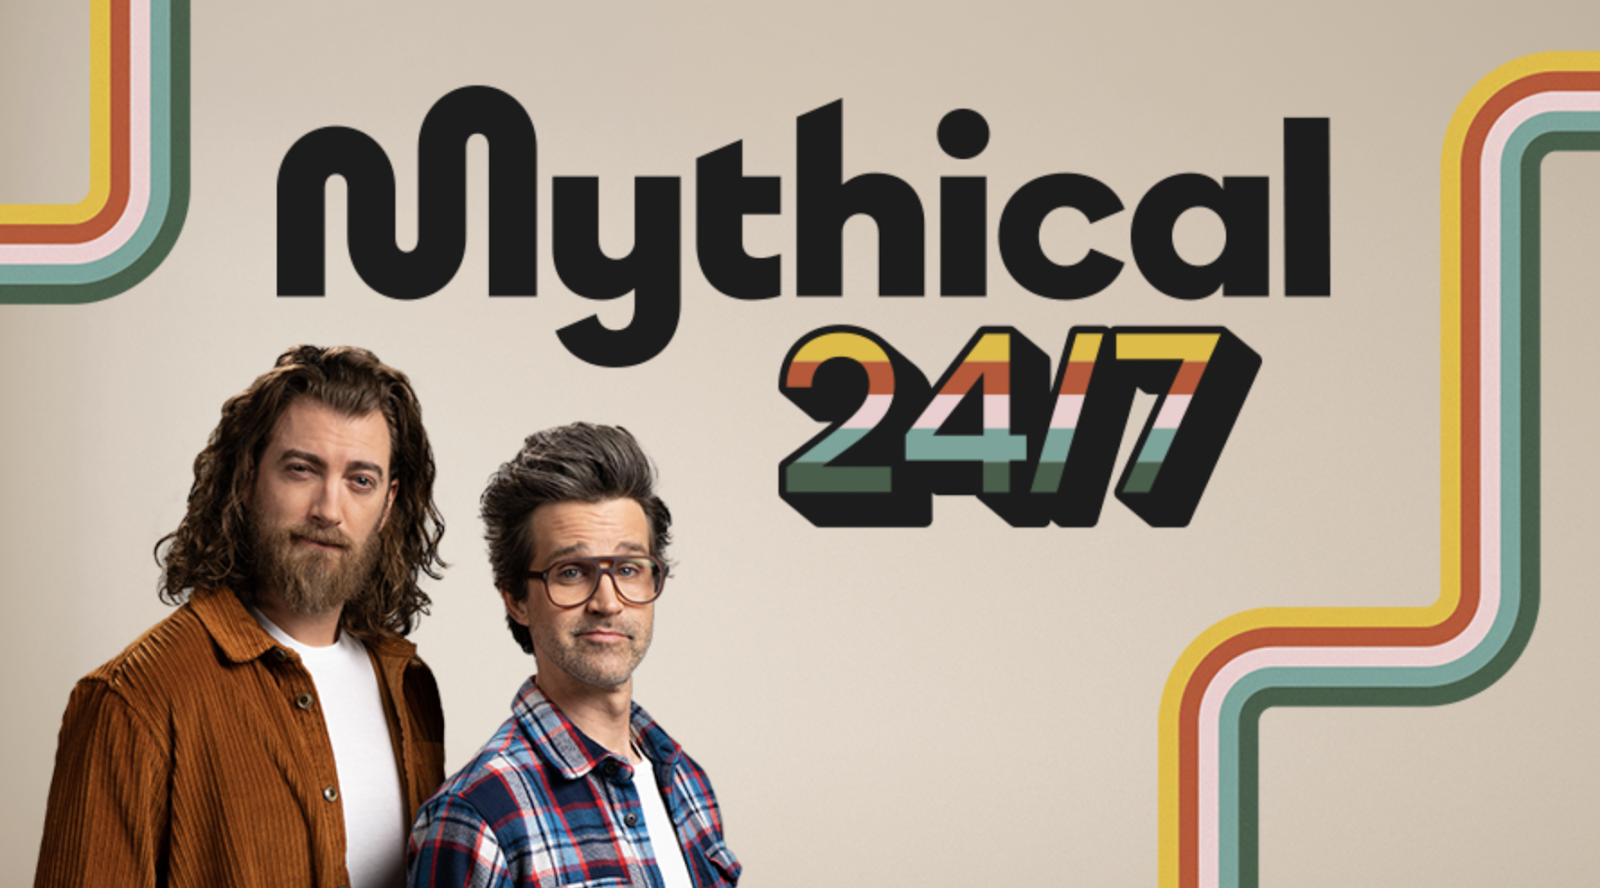 Sling TV Freestream Adds 11 Free Channels, Including YouTube Hit Mythical 24/7 and Kim’s Convenience